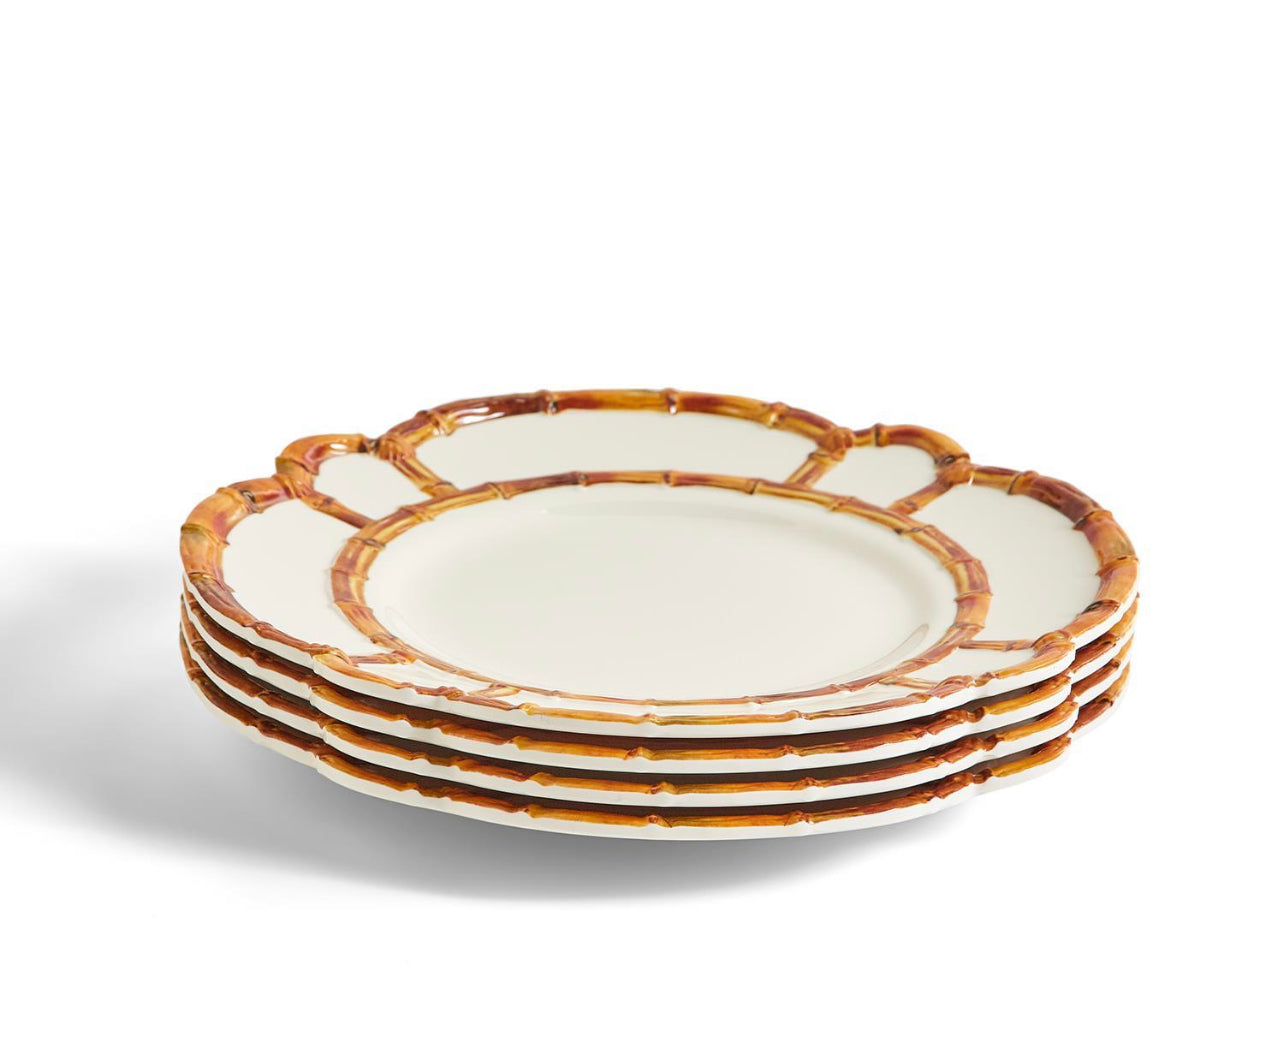 Set of 4 Bamboo Touch Dinner Plates with Bamboo Rim